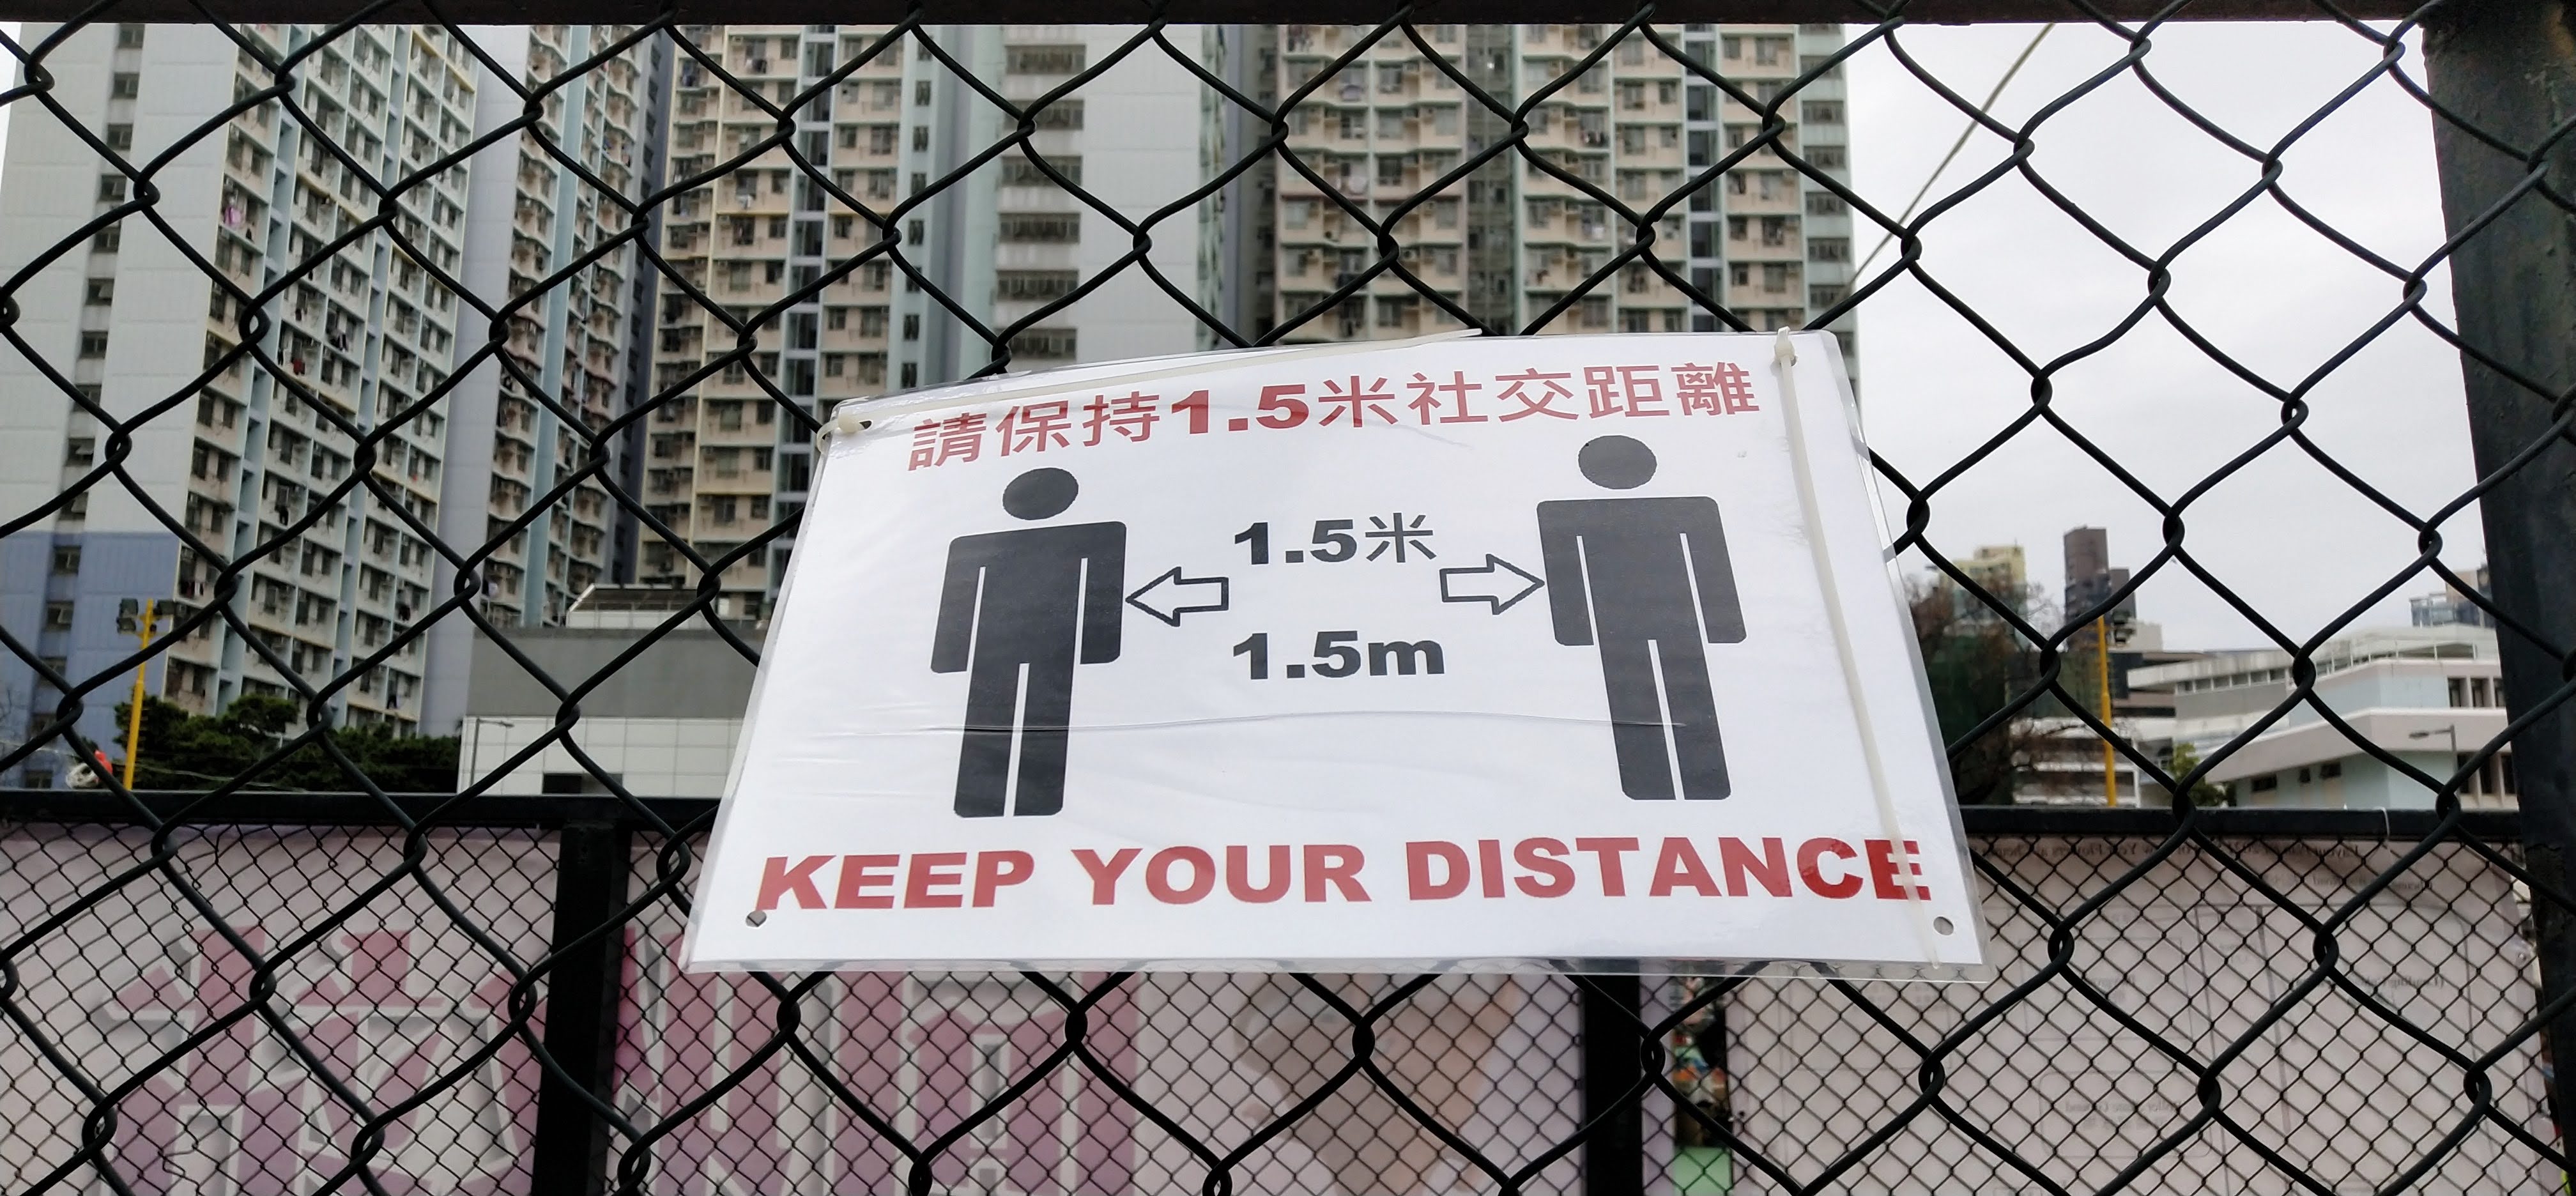 Keeping social distance is a must